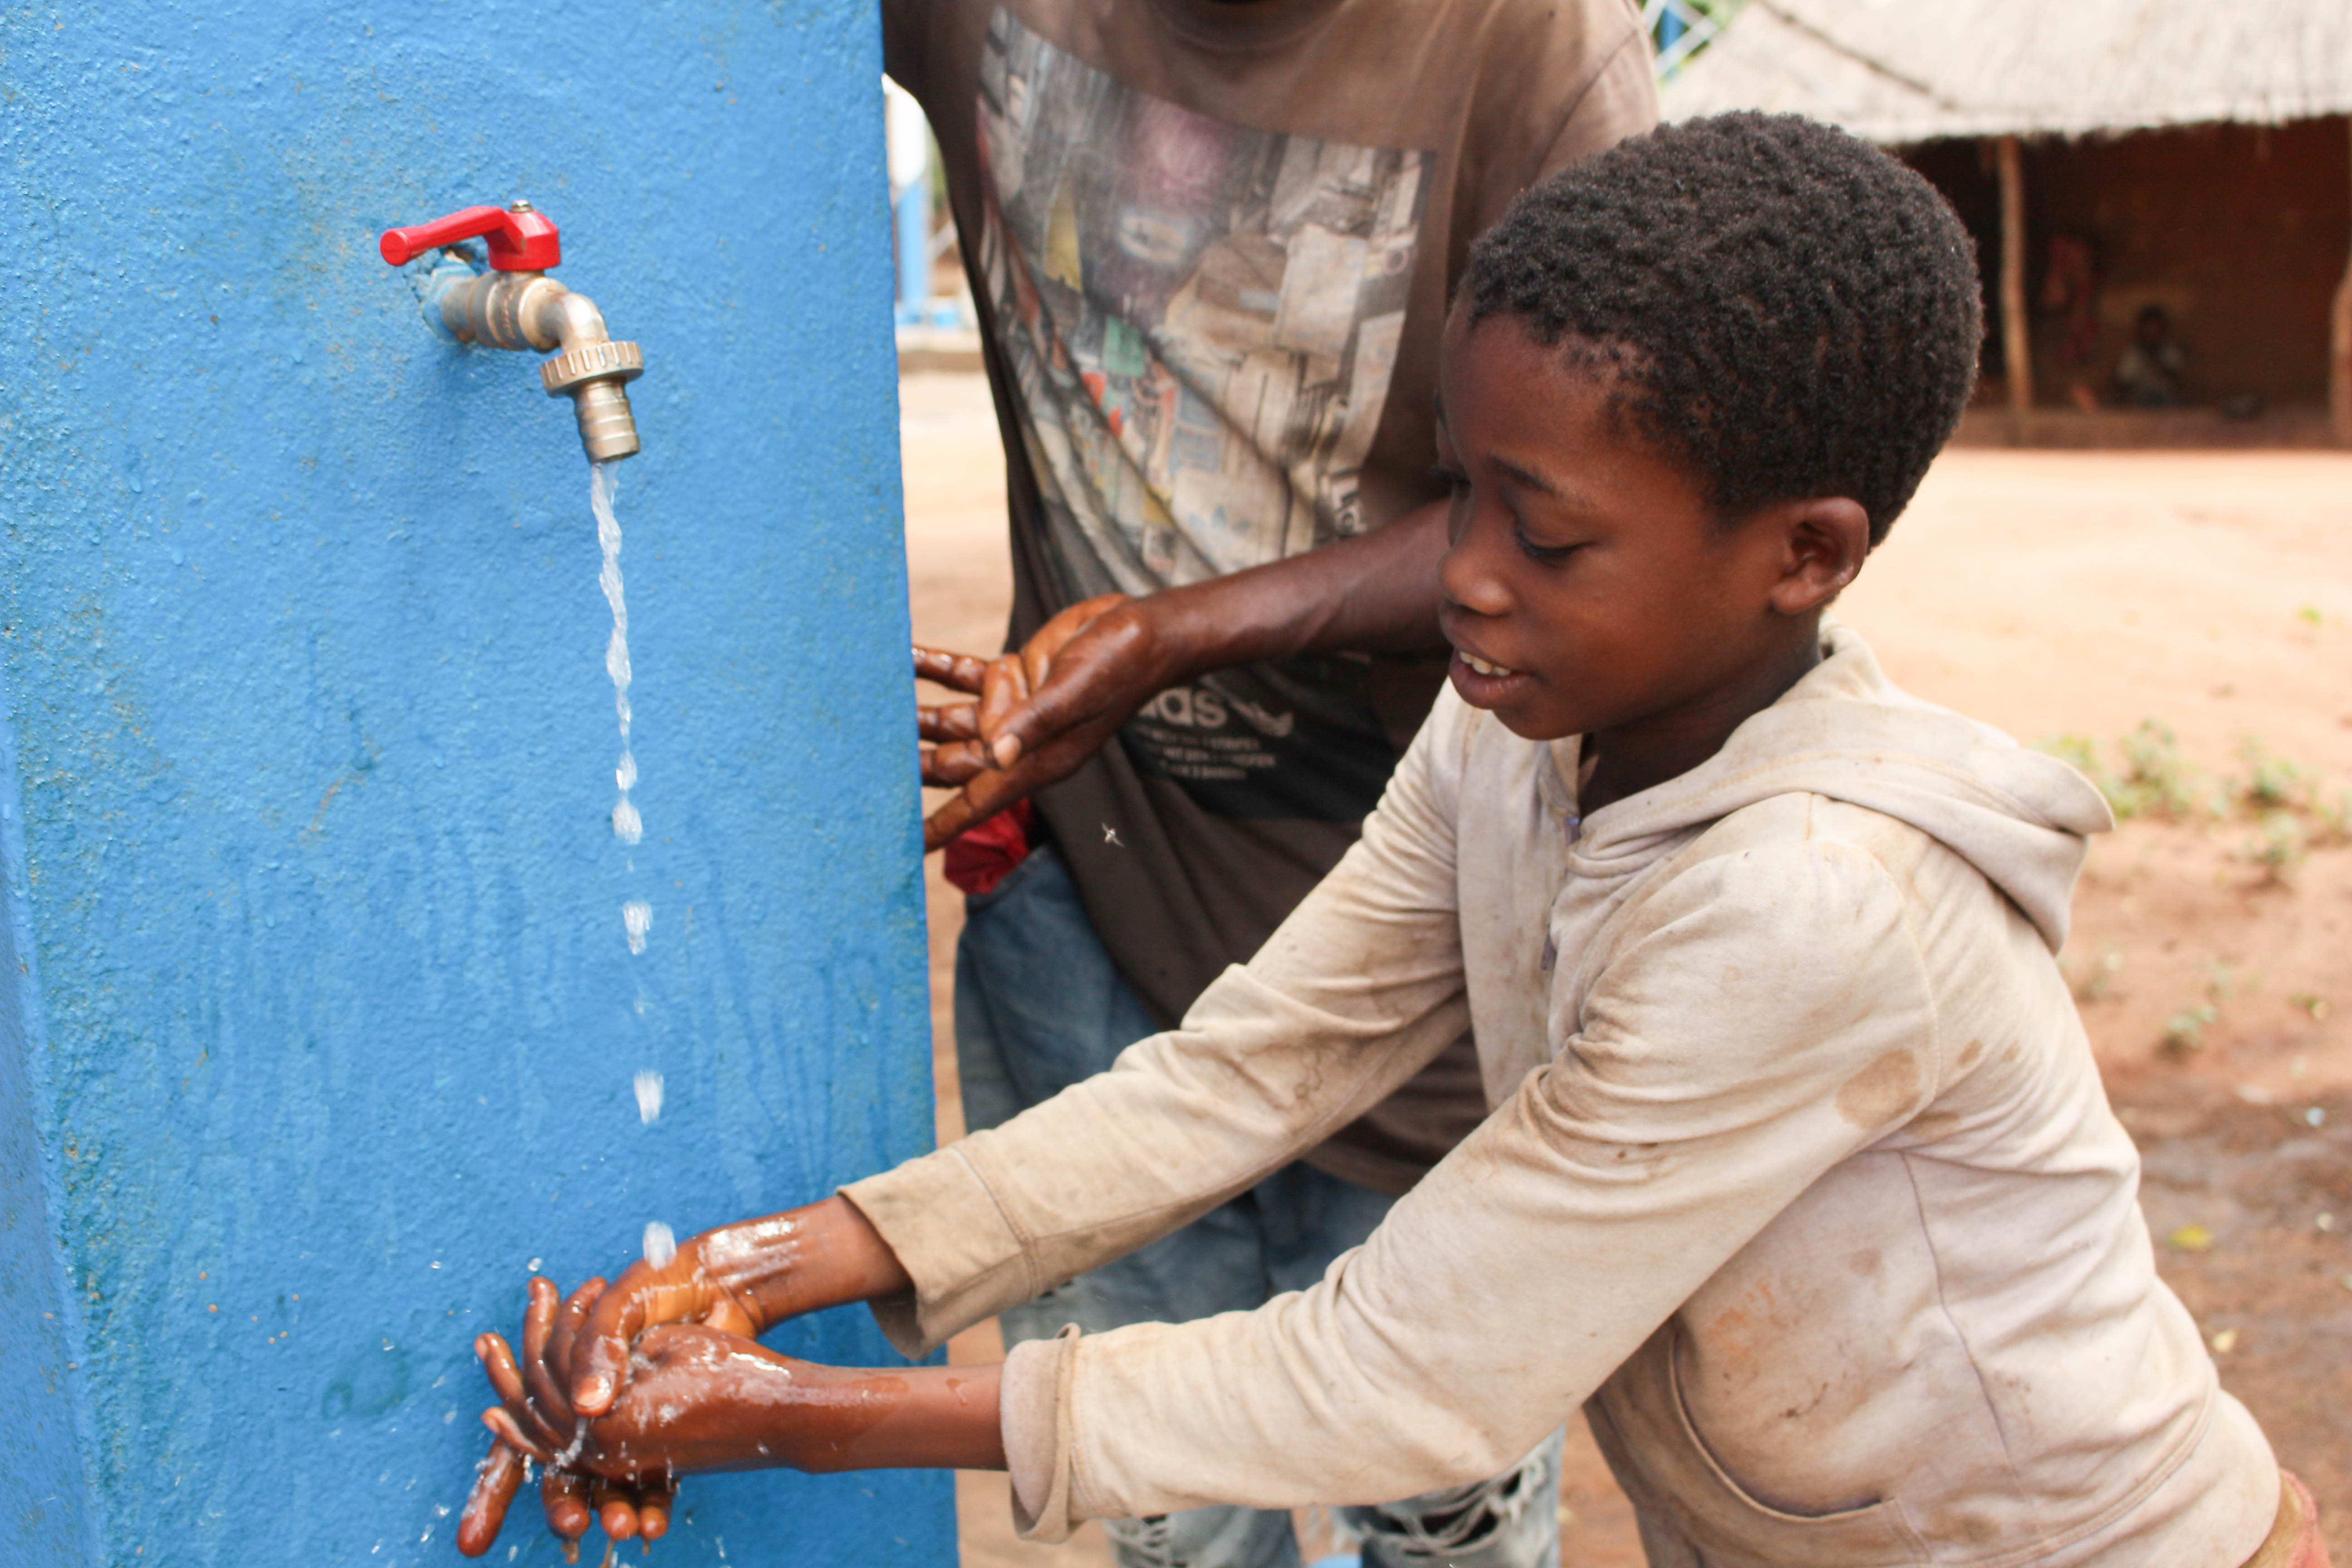  Dércio drinks clean water from the tap with the help of his father, Silvério.